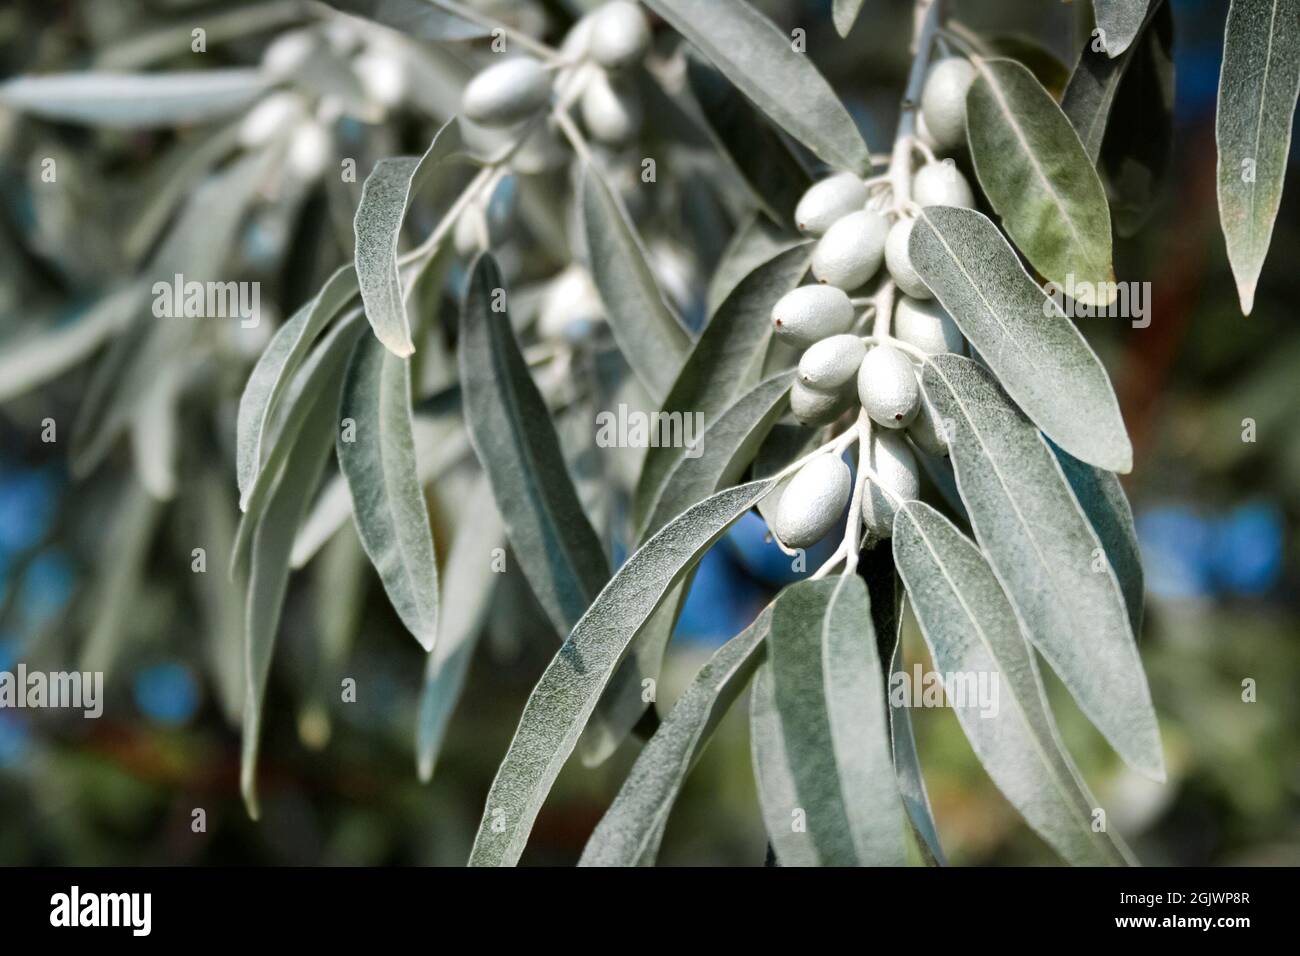 Closeup of Elaeagnus angustifolia (commonly called Russian olive, silver berry, oleaster, Persian olive, or wild olive) branch with green fruits Stock Photo